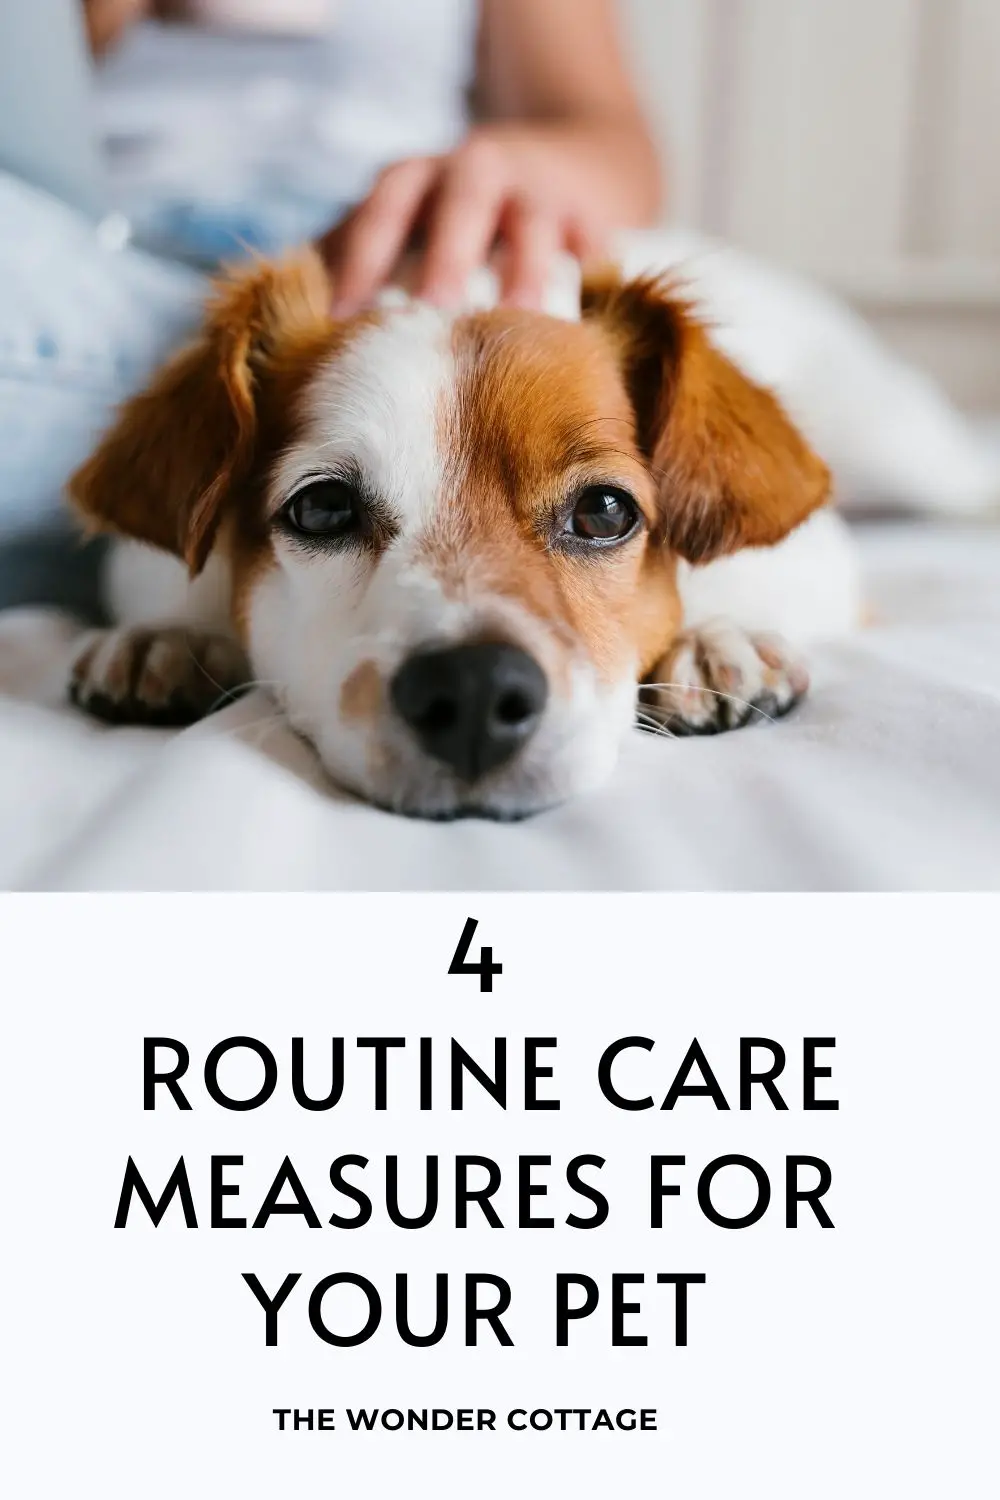 4 routine care measures for your pets